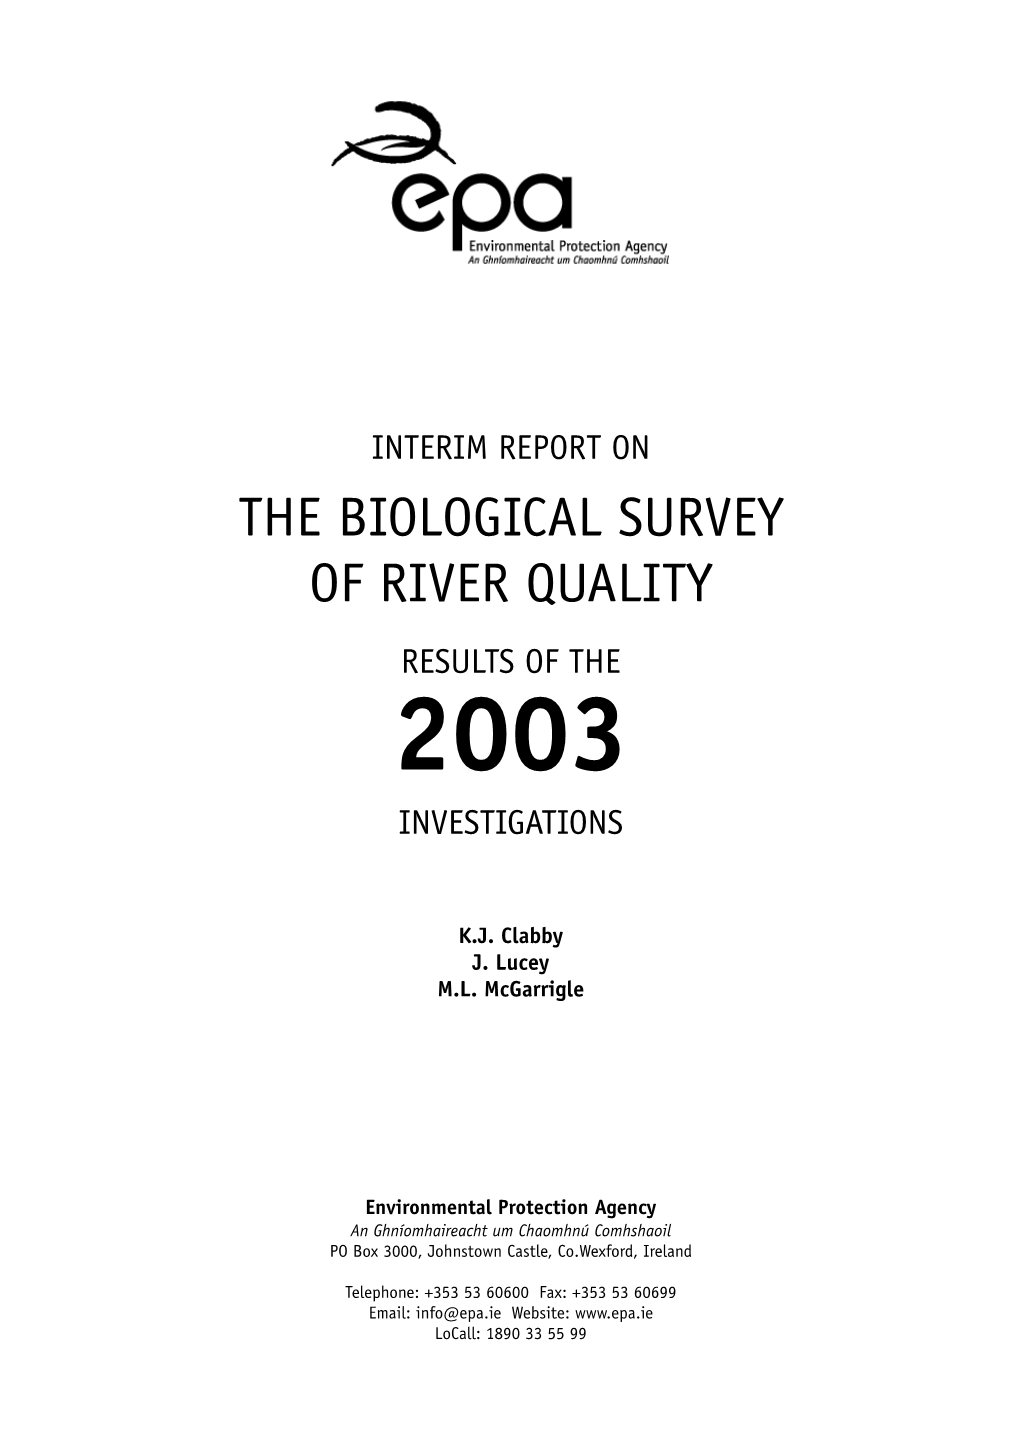 The Biological Survey of River Quality Results of the 2003 Investigations